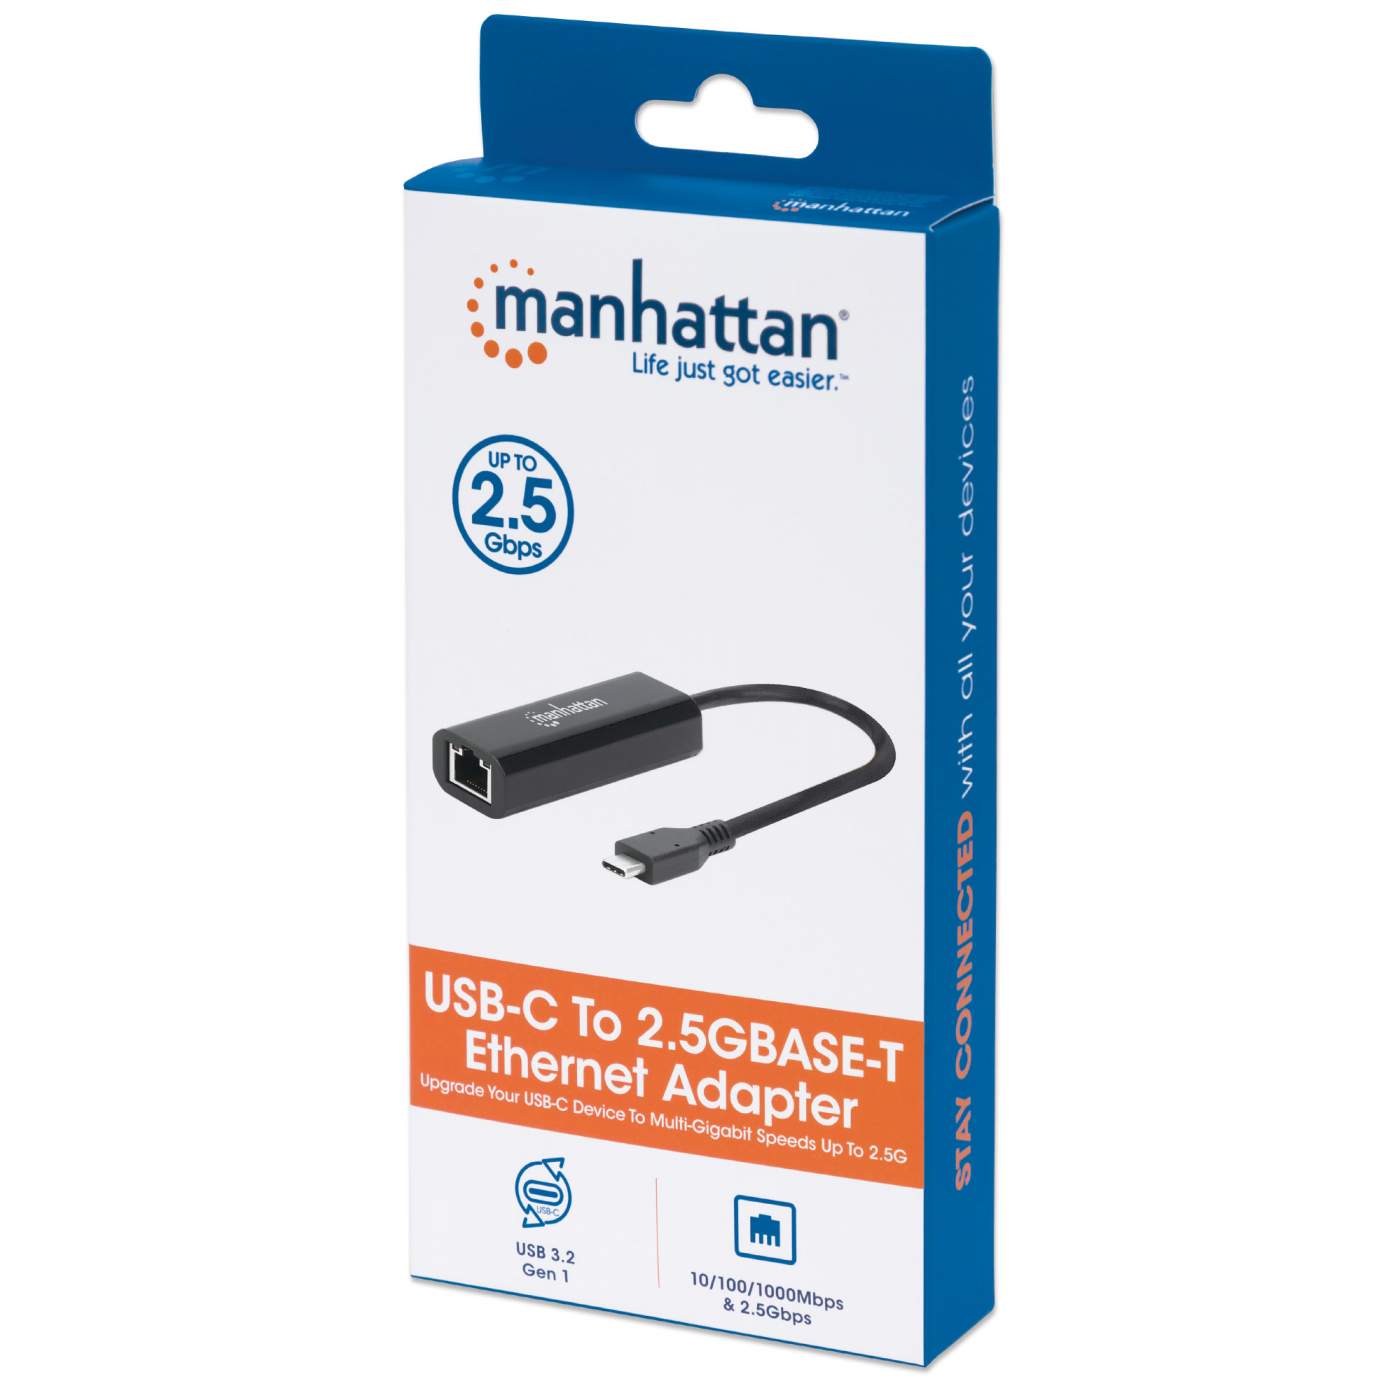 USB-C to 2.5GBASE-T Ethernet Adapter Packaging Image 2